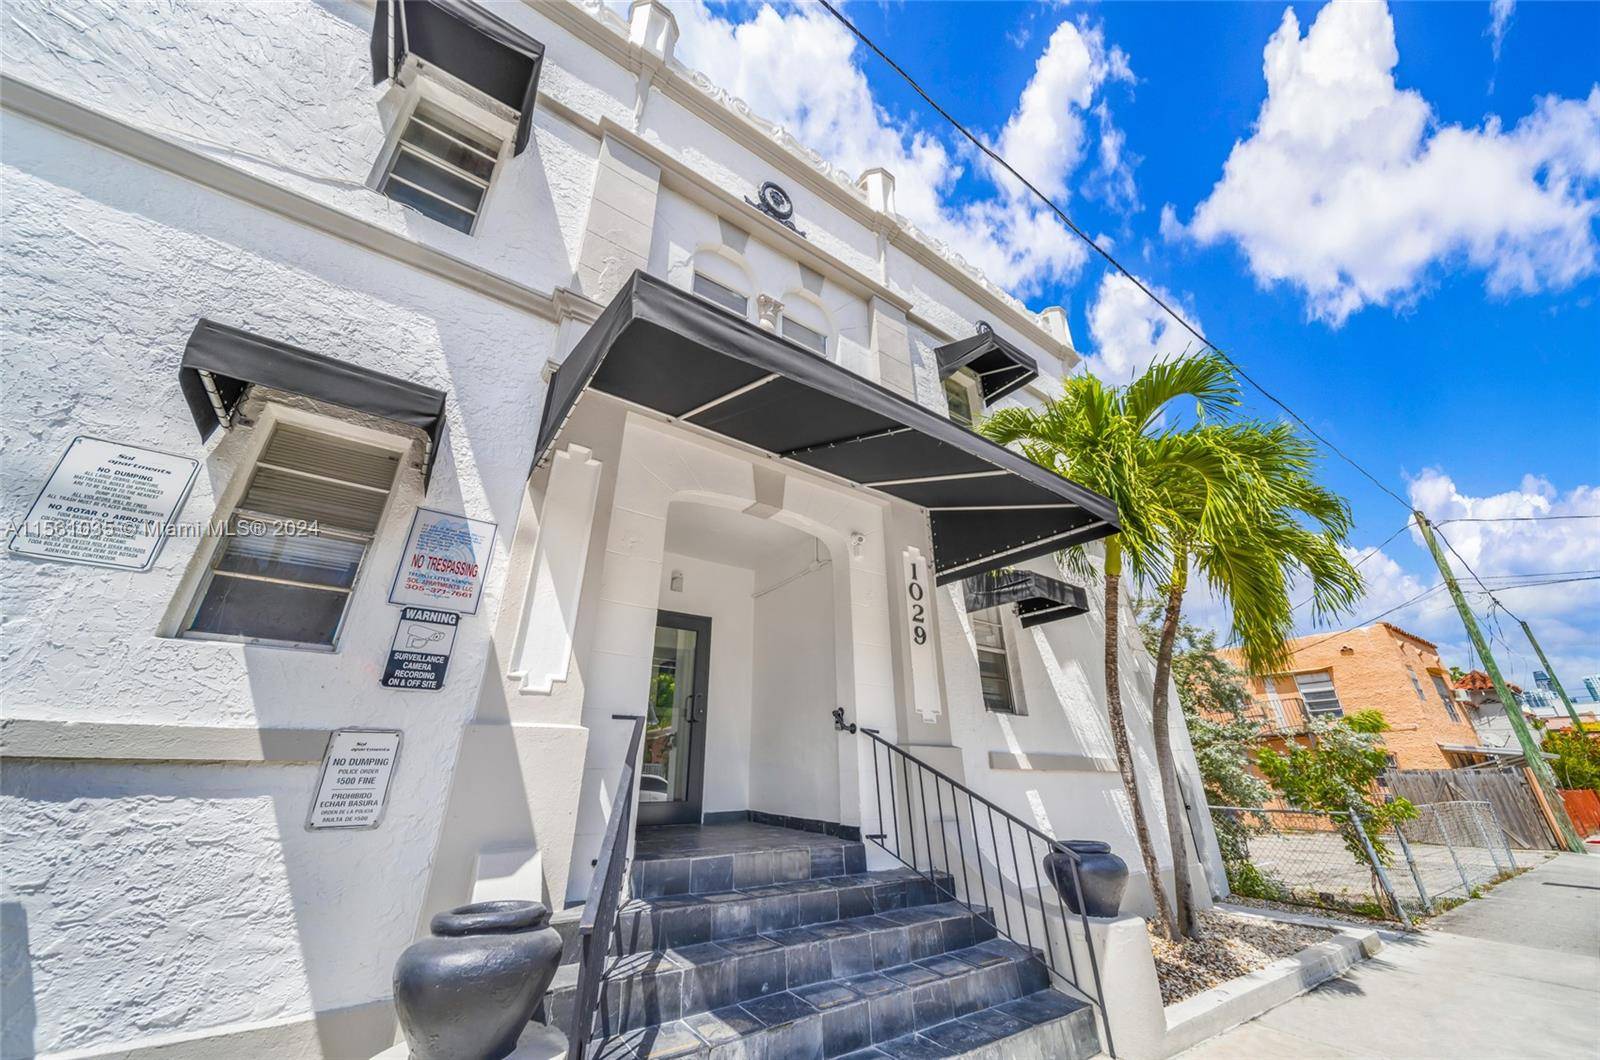 In the heart of Little Havana, South Florida's cultural hub, sits a meticulously renovated 16 unit multifamily property.